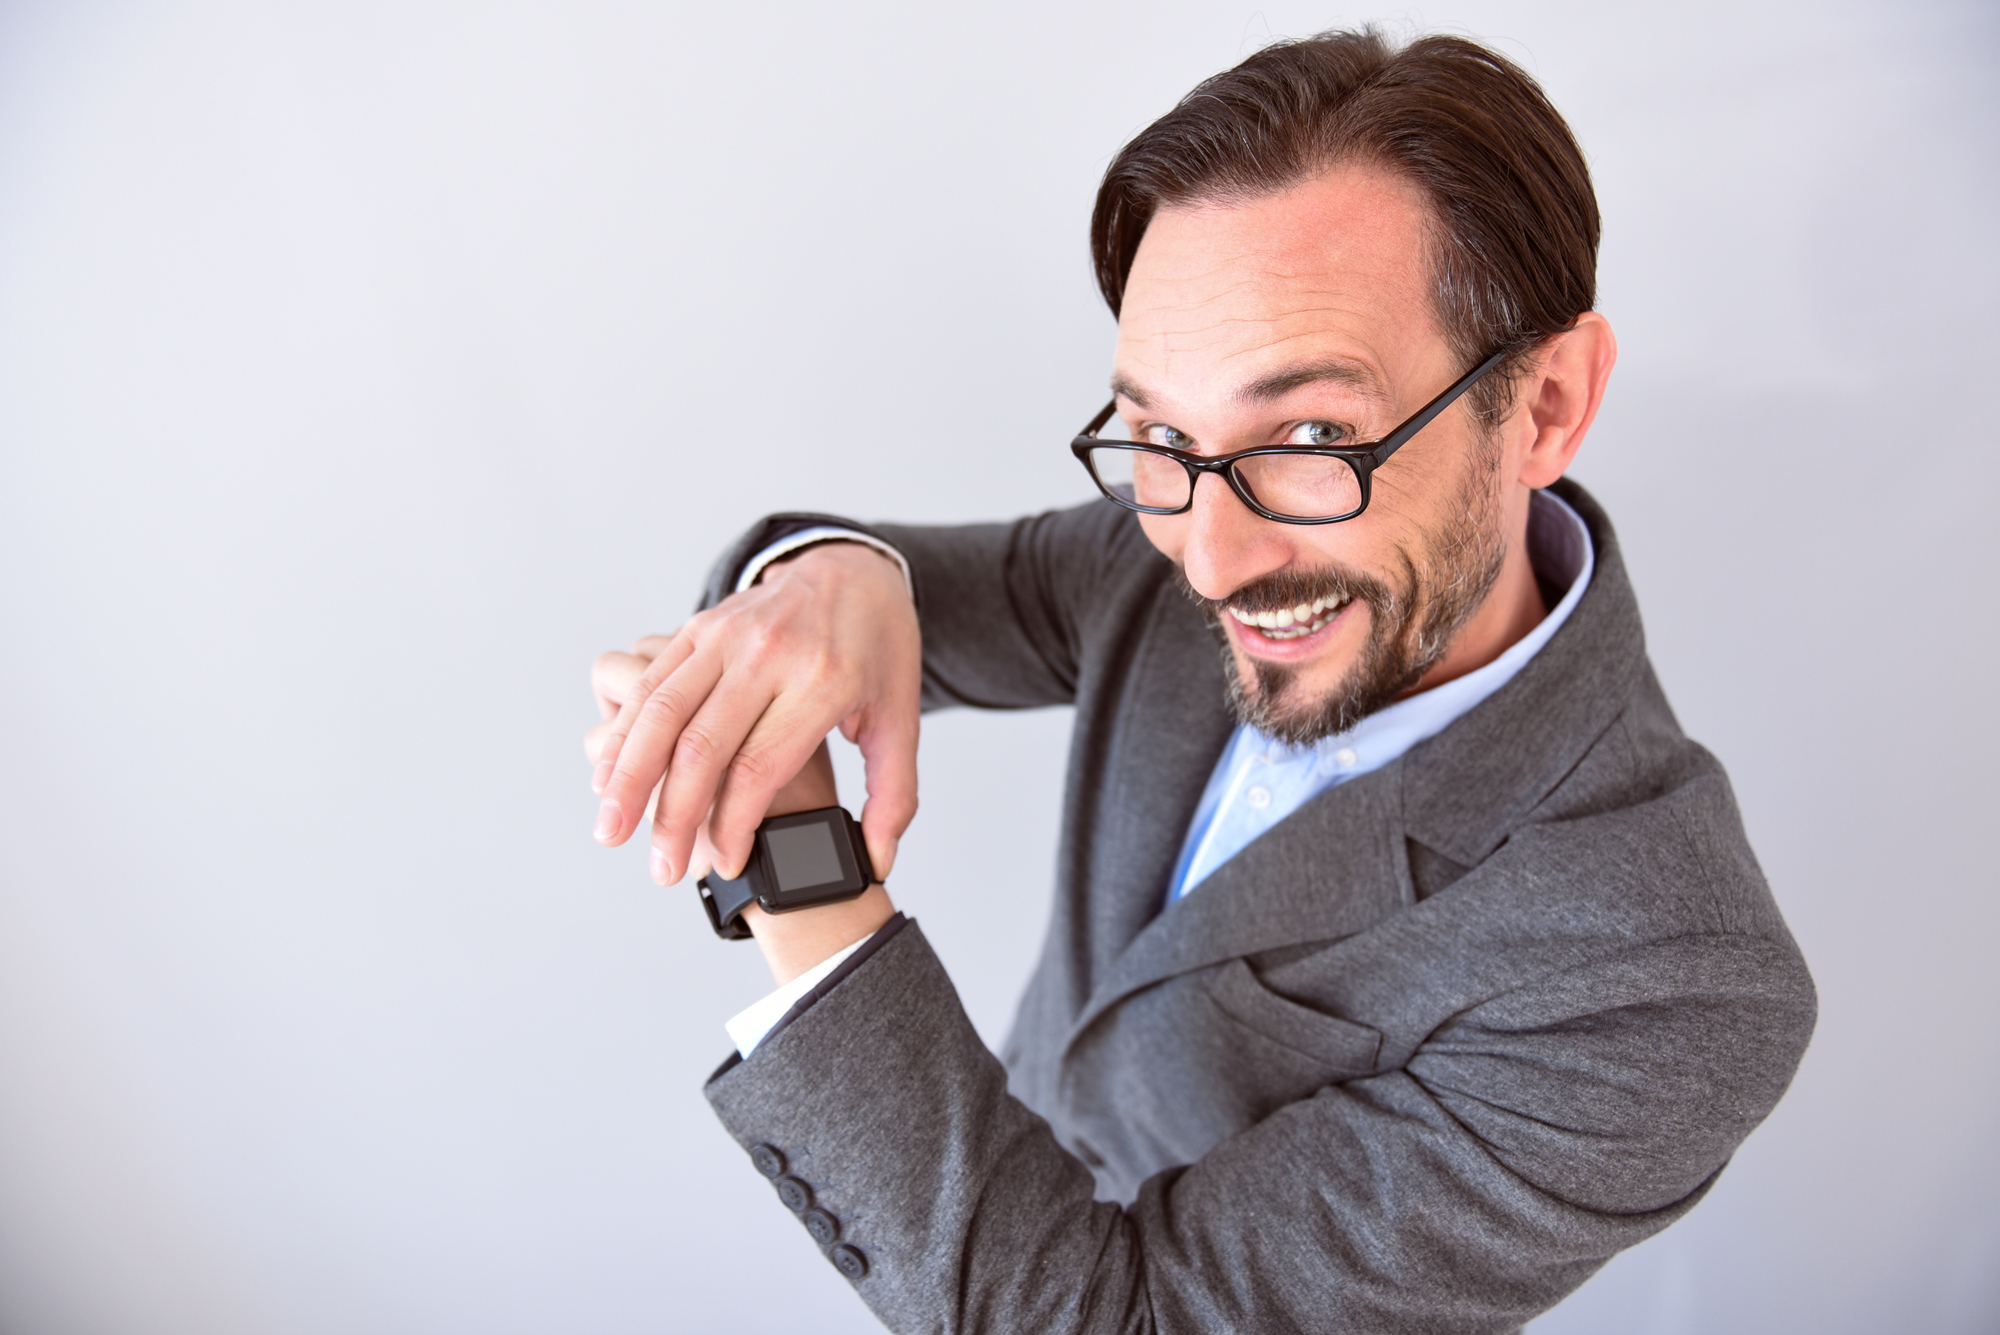 It is very useful. Confident mature man with smile on his face touching and showing a smart watch on his wrist isolated on the grey background